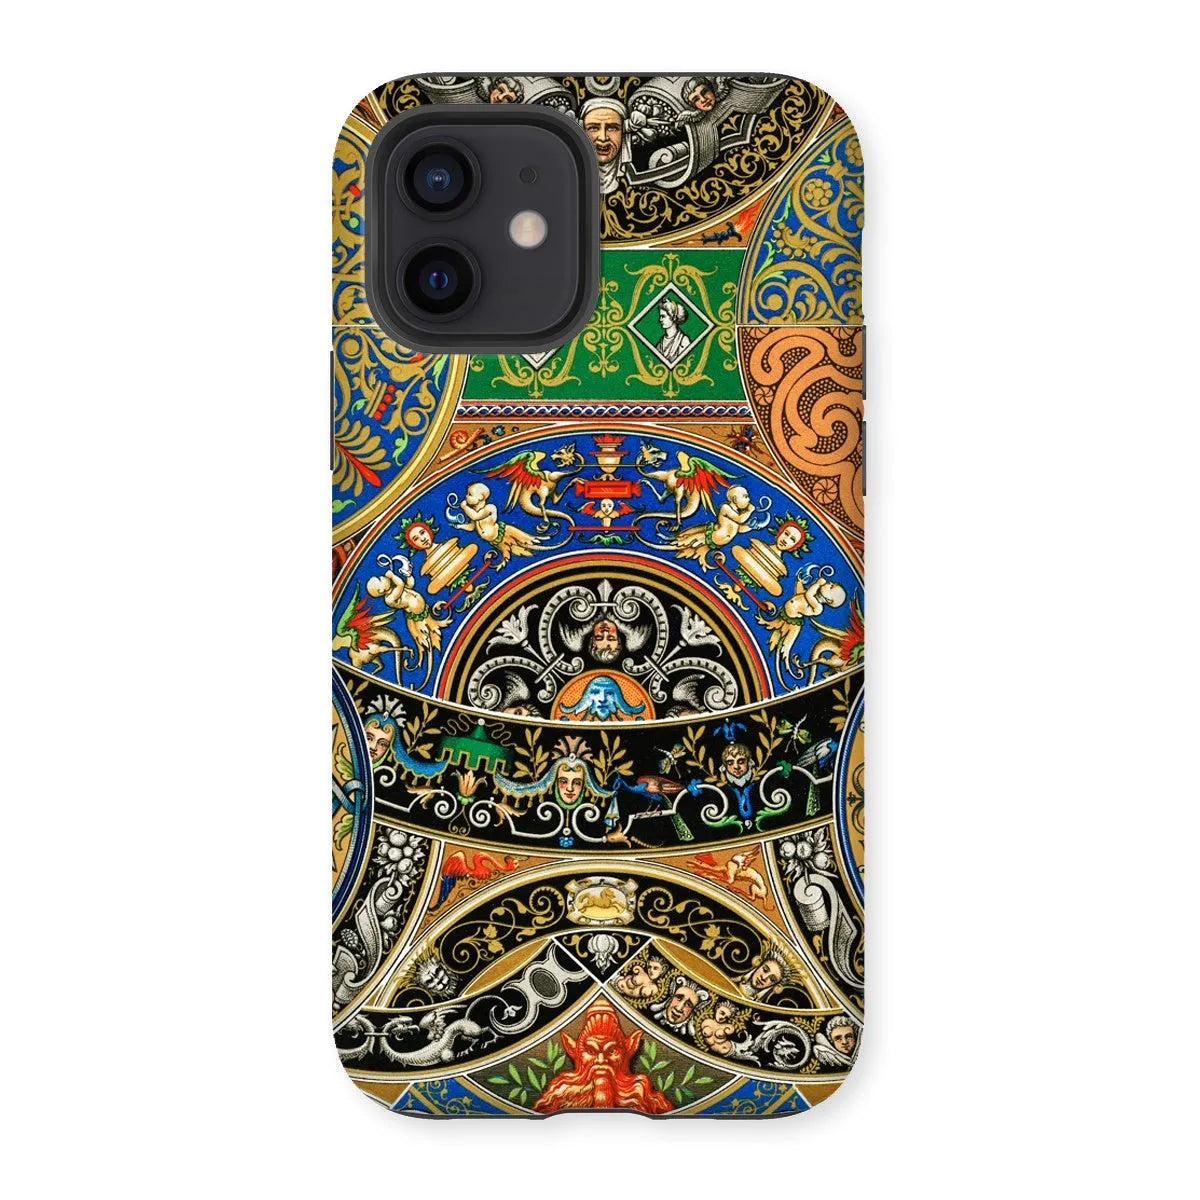 Renaissance Pattern 2 By Auguste Racinet Tough Phone Case - Iphone 12 / Gloss - Mobile Phone Cases - Aesthetic Art